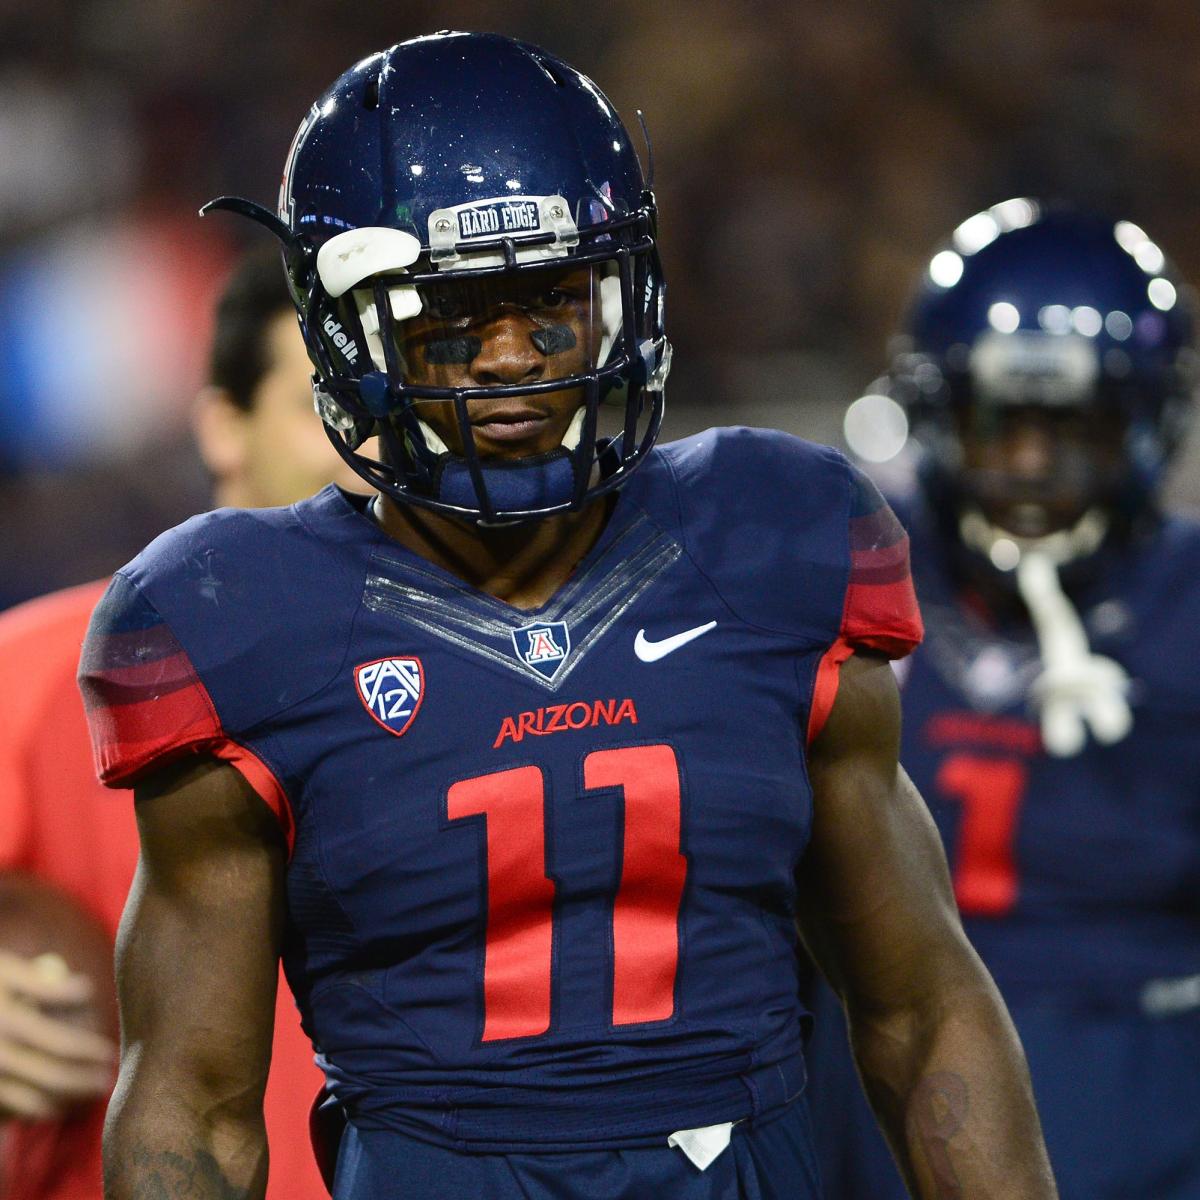 Will Parks Nfl Draft 2016 Scouting Report Grade For Broncos Rookie